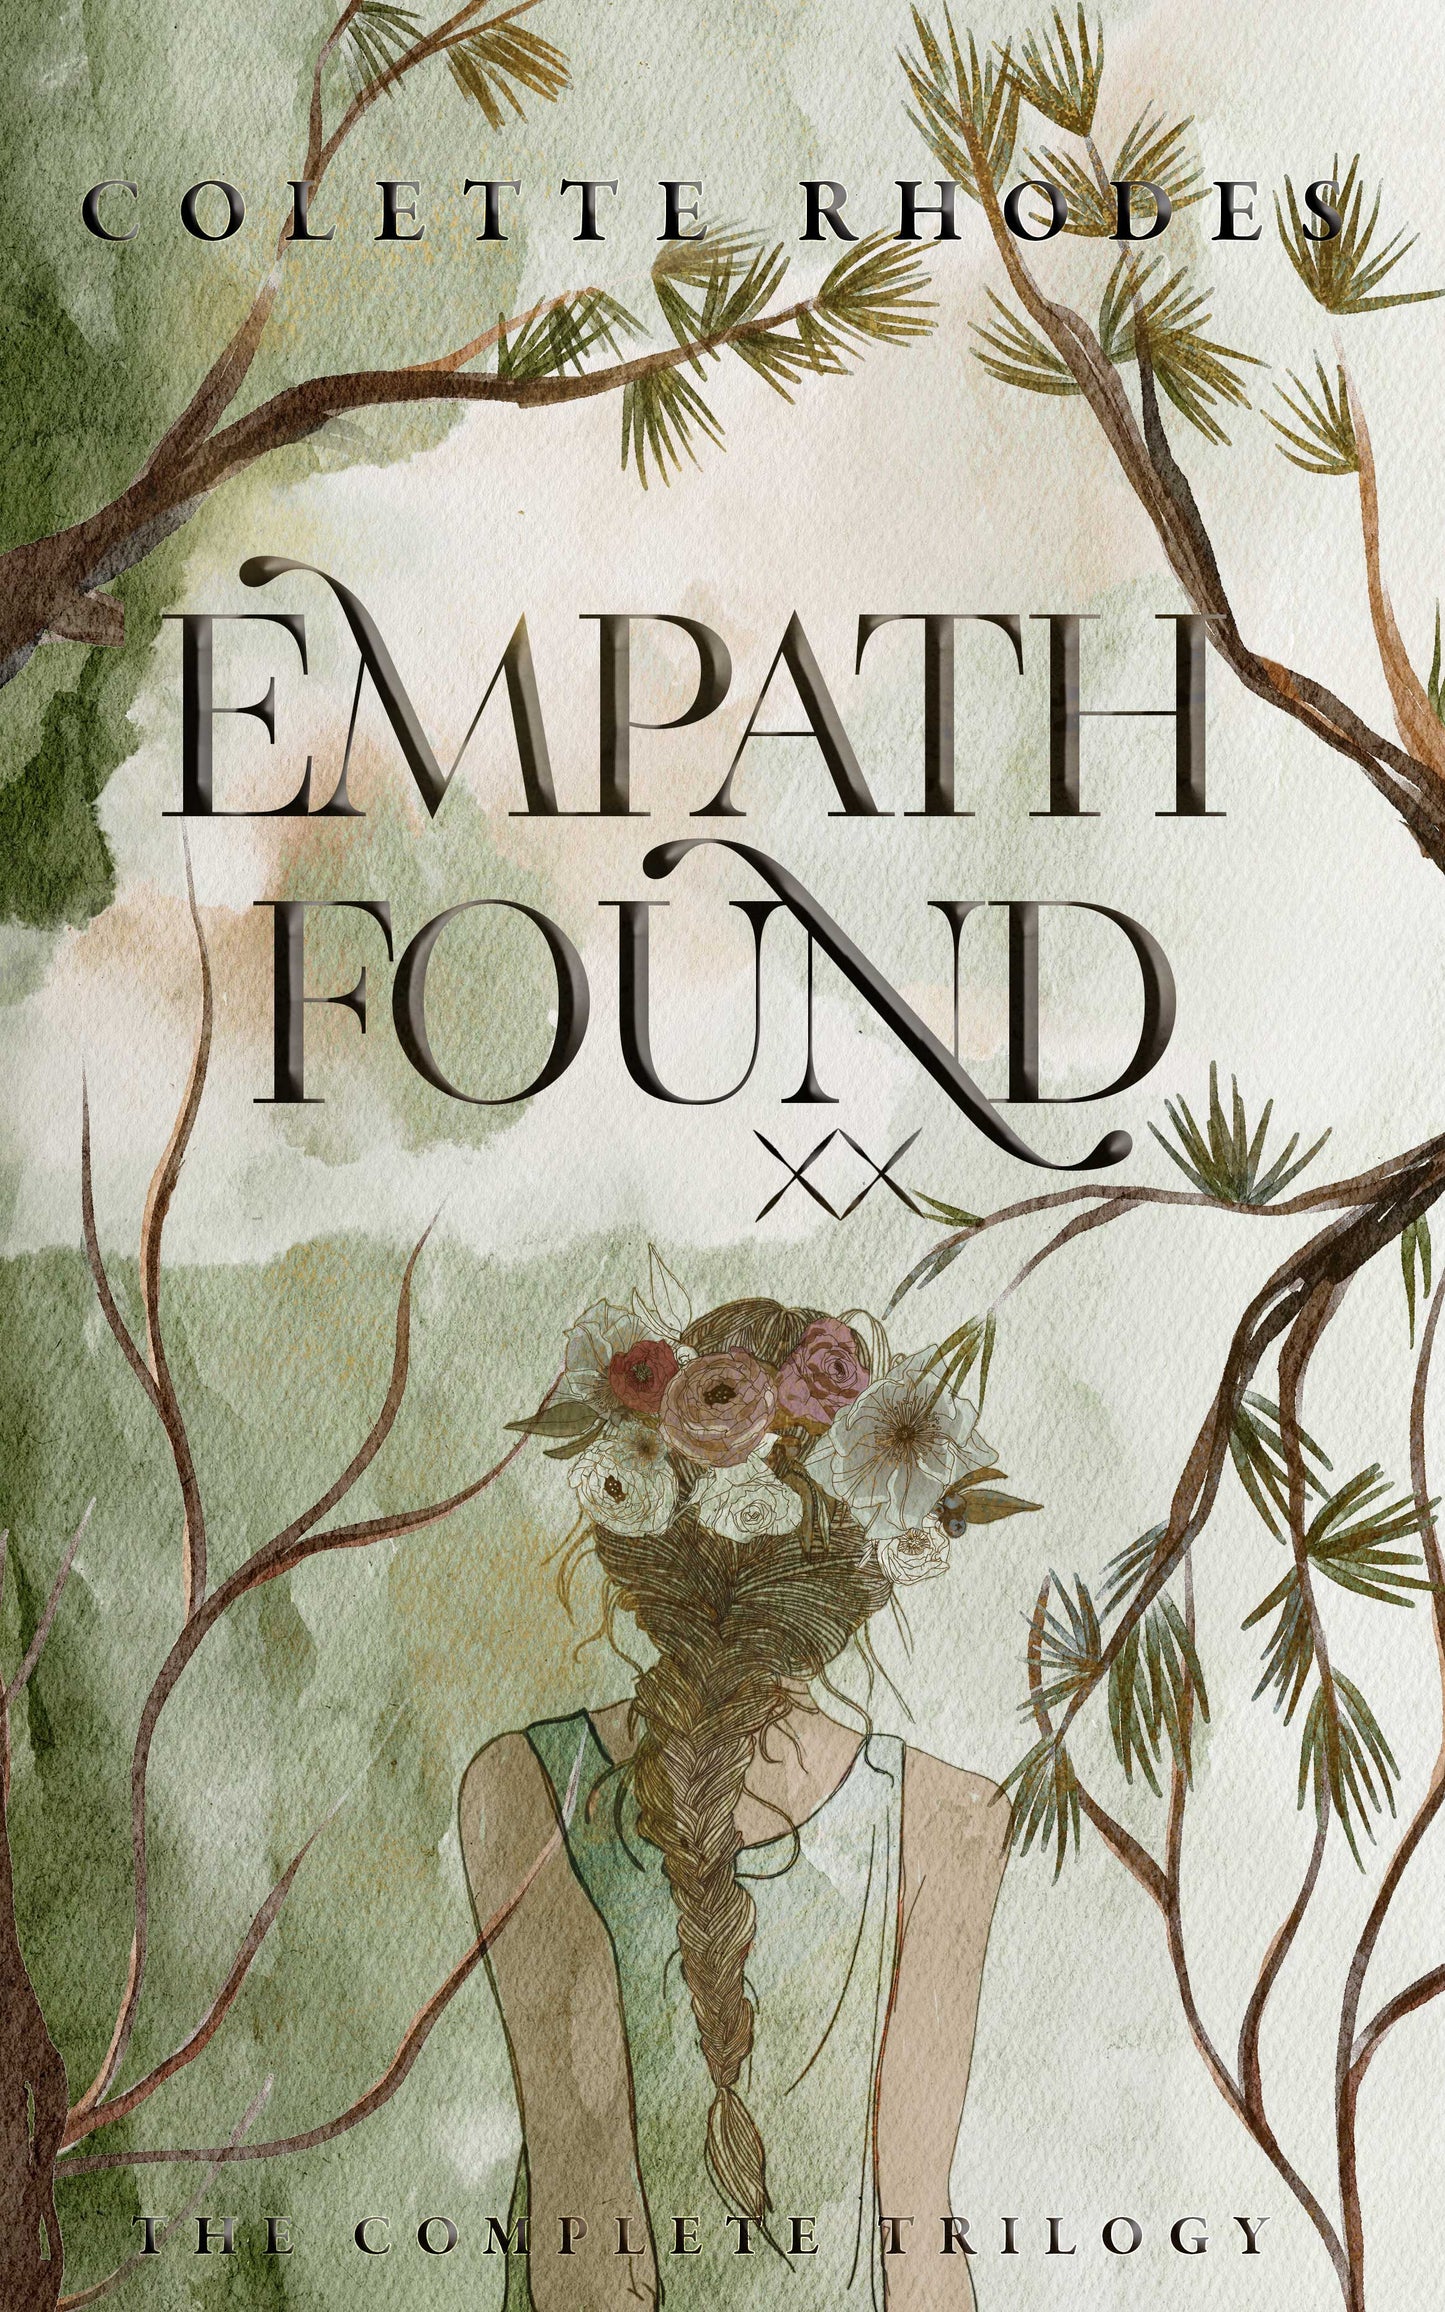 Empath Found: The Complete Trilogy